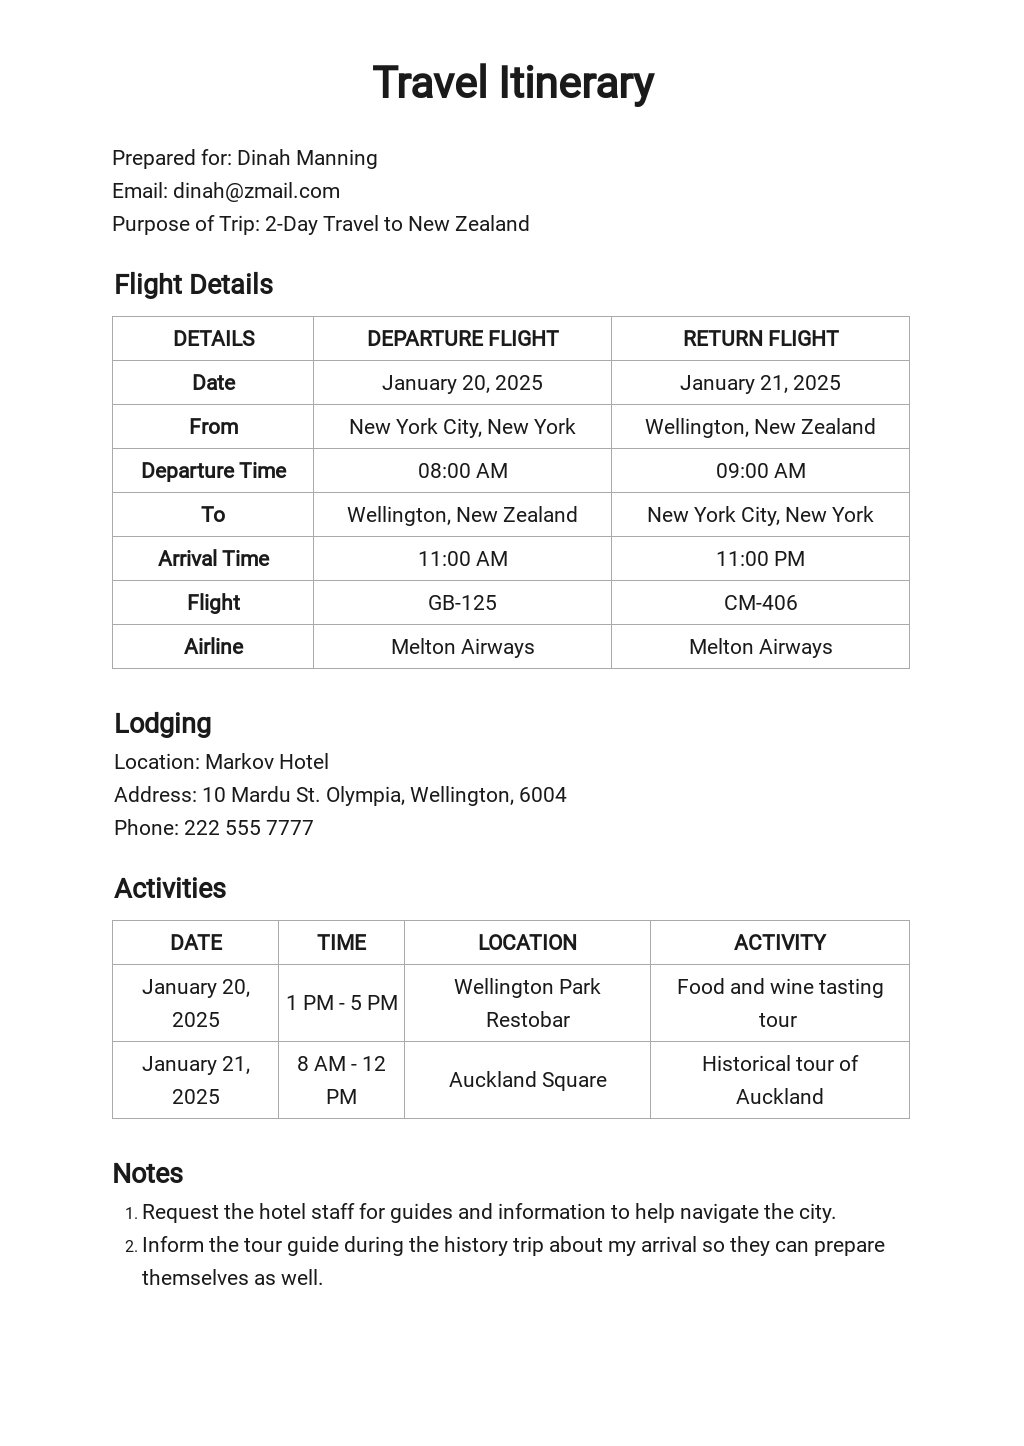 FREE Itinerary Templates in Google Docs Template net